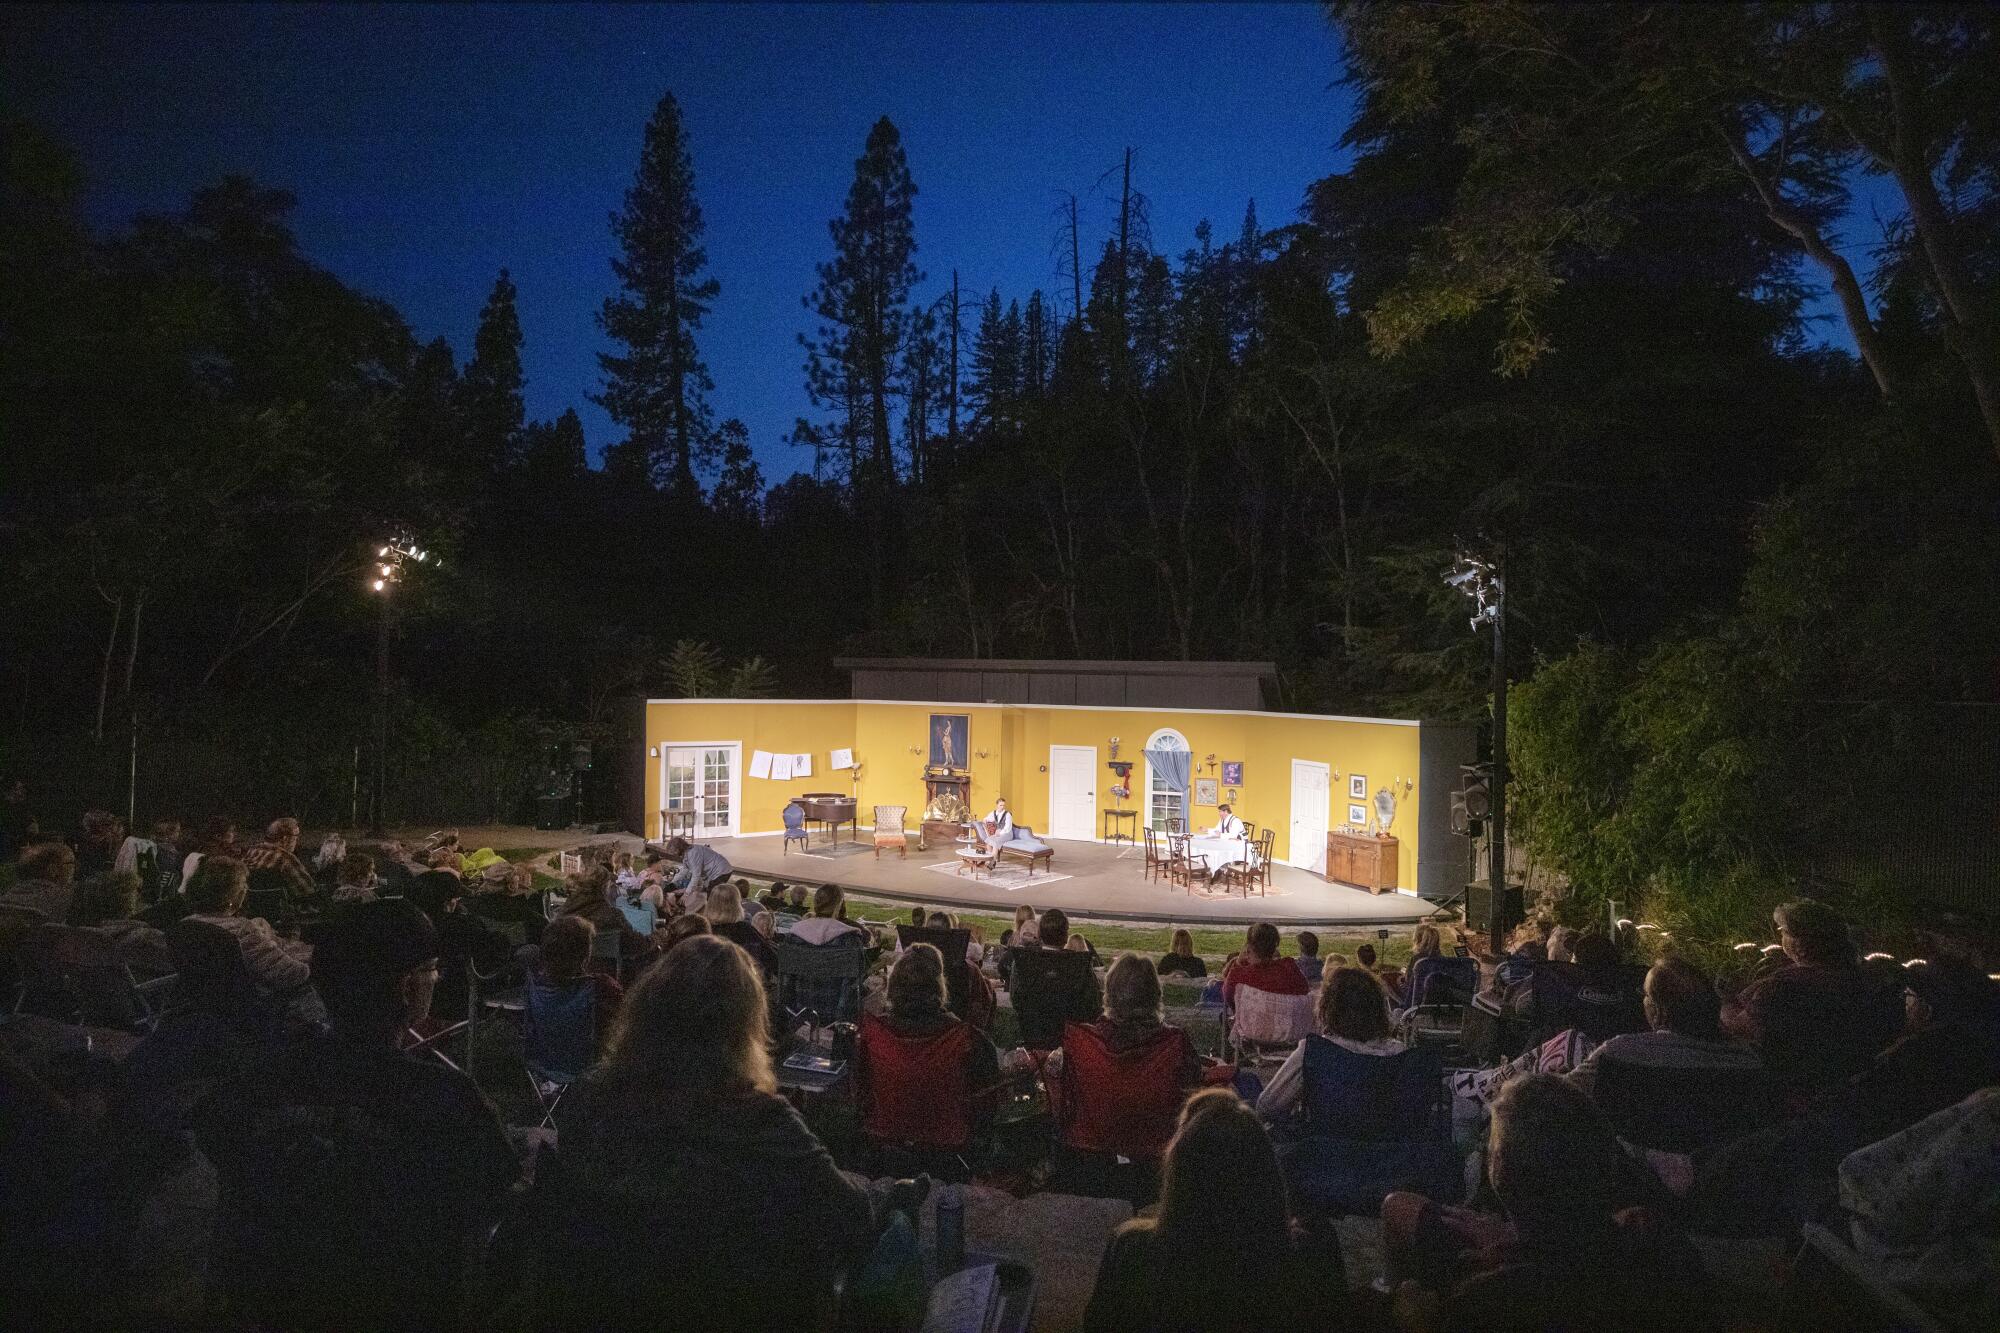 A theater production at an outdoor venue